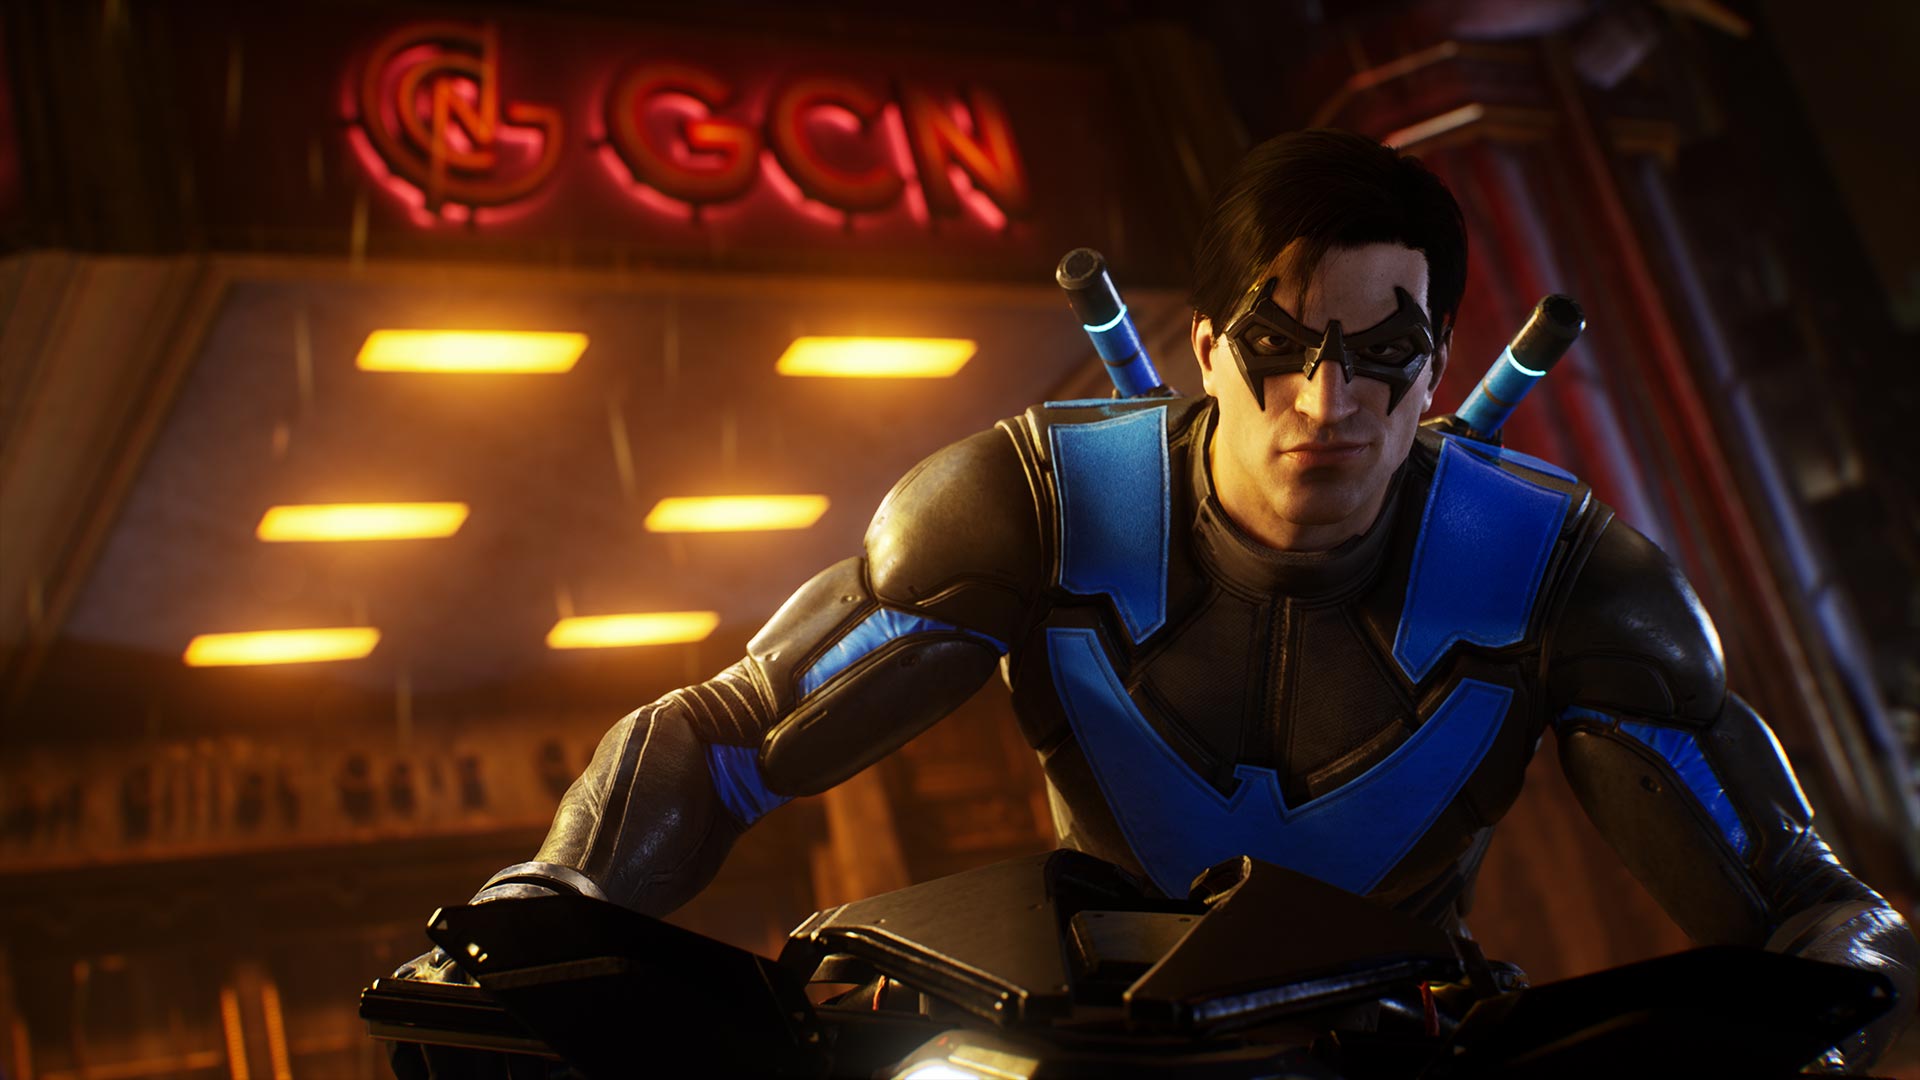 Gotham Knights - Nightwing poses in front of Gotham City News with a smirk